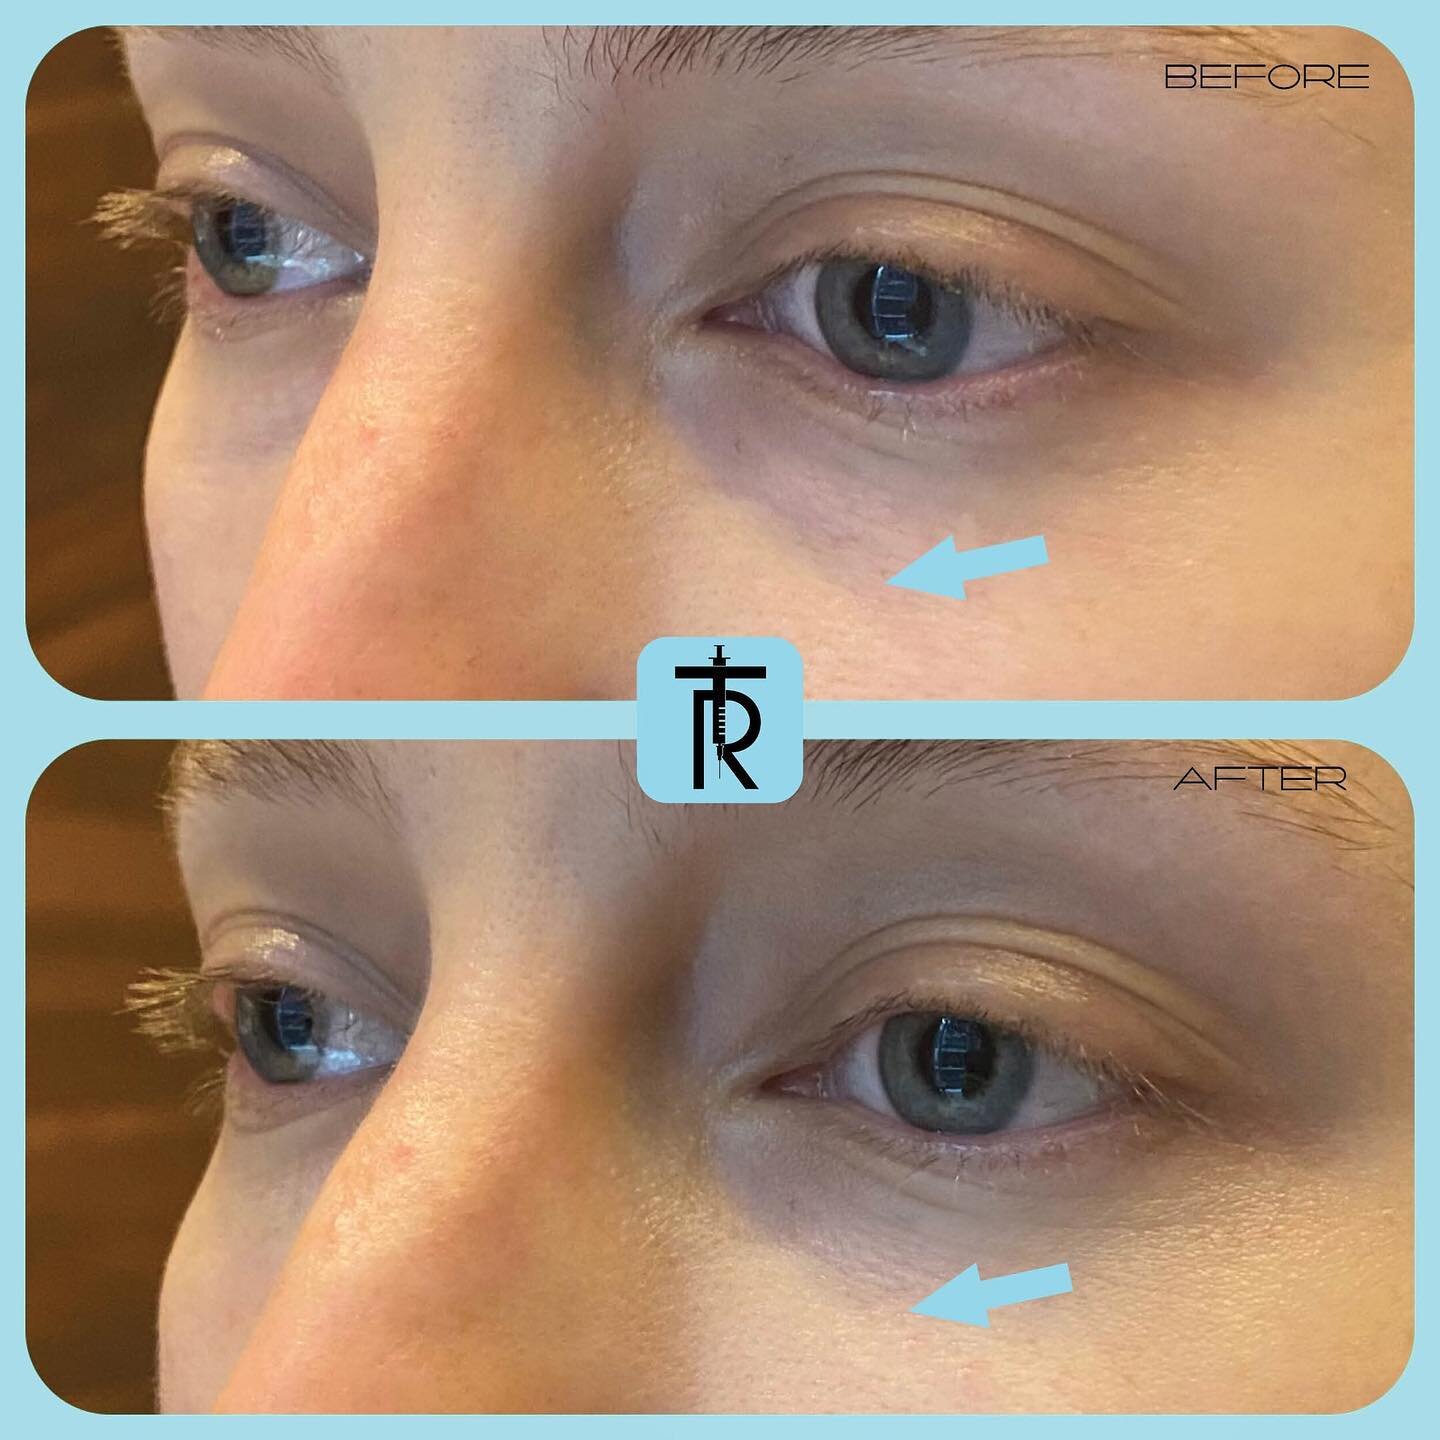 This patient had under eye hollowness and &ldquo;dark circles&rdquo; caused by volume loss which she stated she always had, but has gotten progressively worse over time. Hyaluronic acid filler was used to fill the hollows to create a smooth appearing